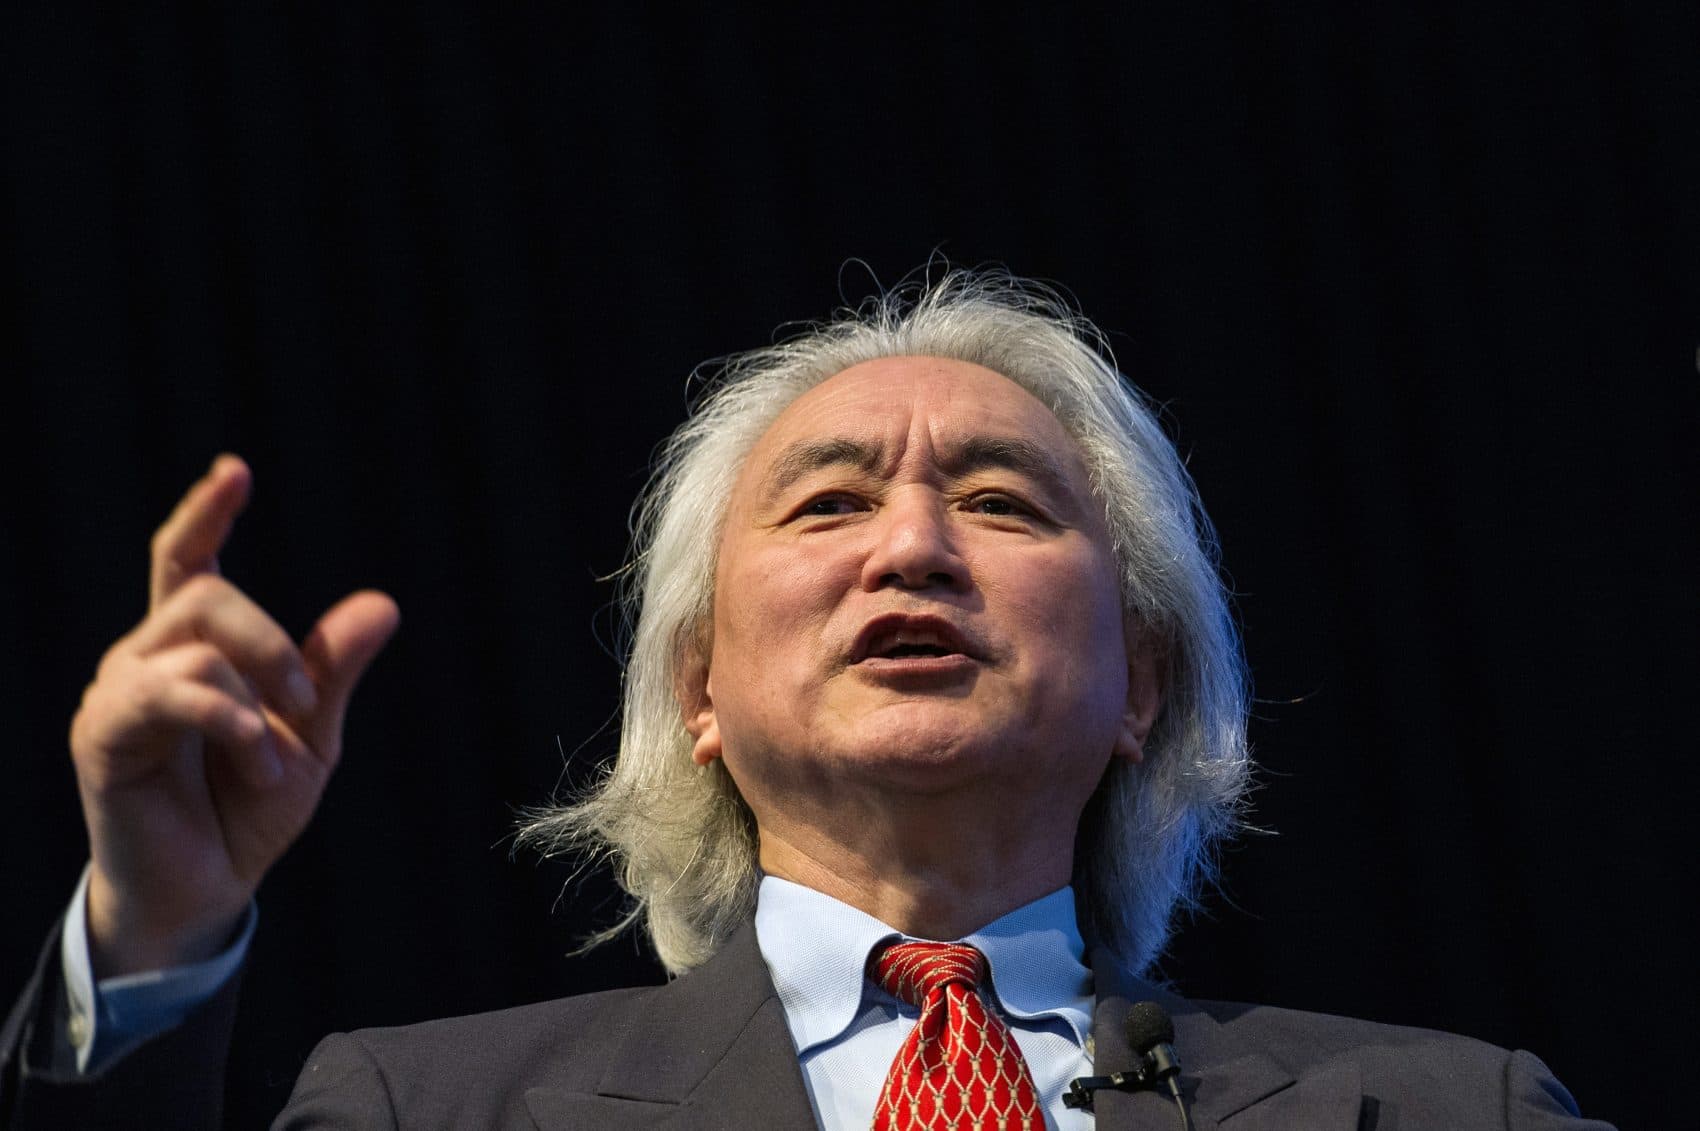 Michio Kaku, a theoretical physicist and the co-founder of string field theory, gives a lecture in 2012. (Yasuyoshi Chiba/AFP/Getty Images)